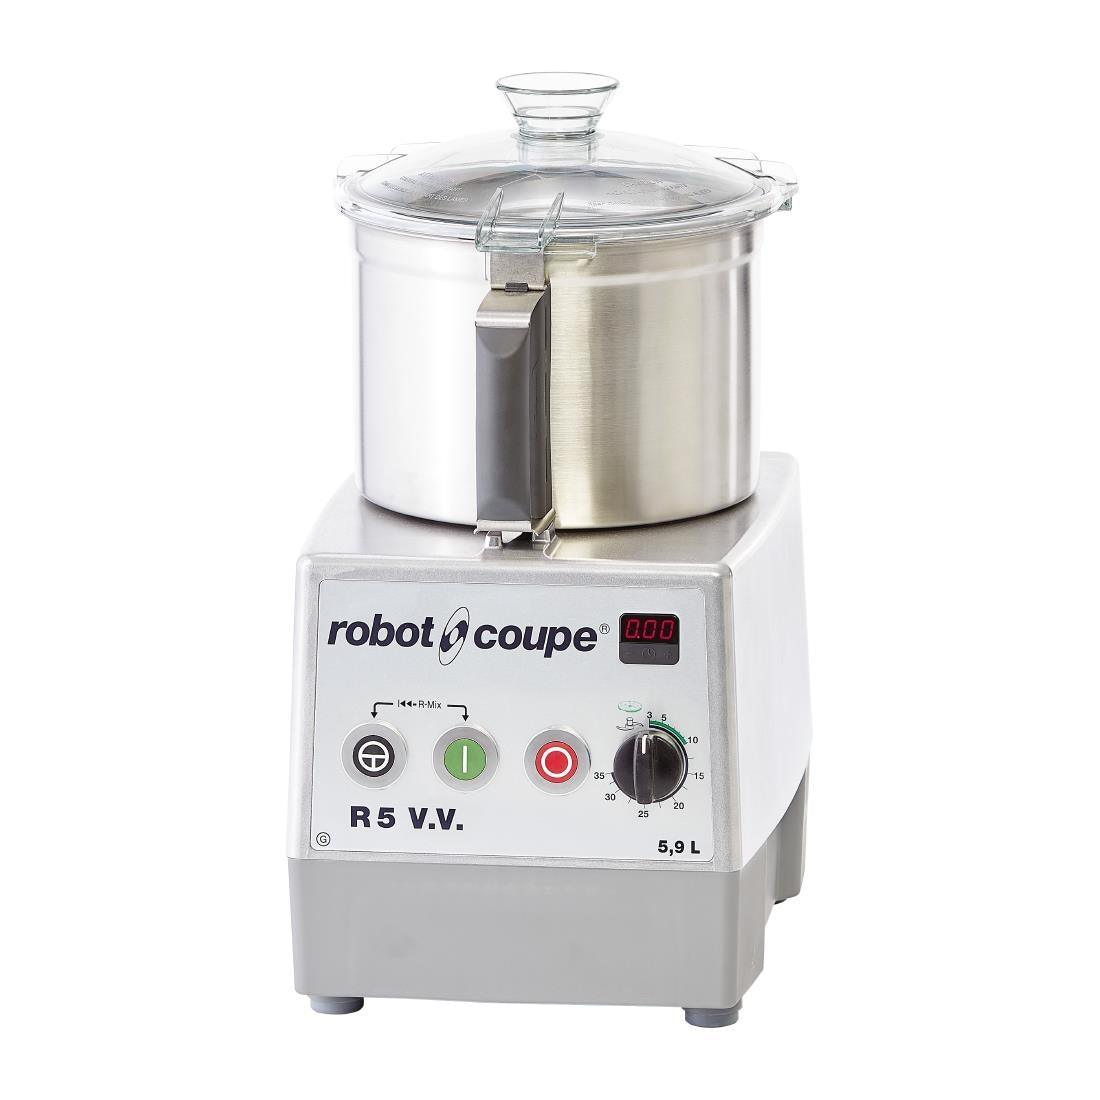 Robot Coupe FZ836 Robot Coupe R 5 V.V. - Cutter Mixer - 5.9L Stainless Bowl-Variable Speed (B2B) - HospoStore